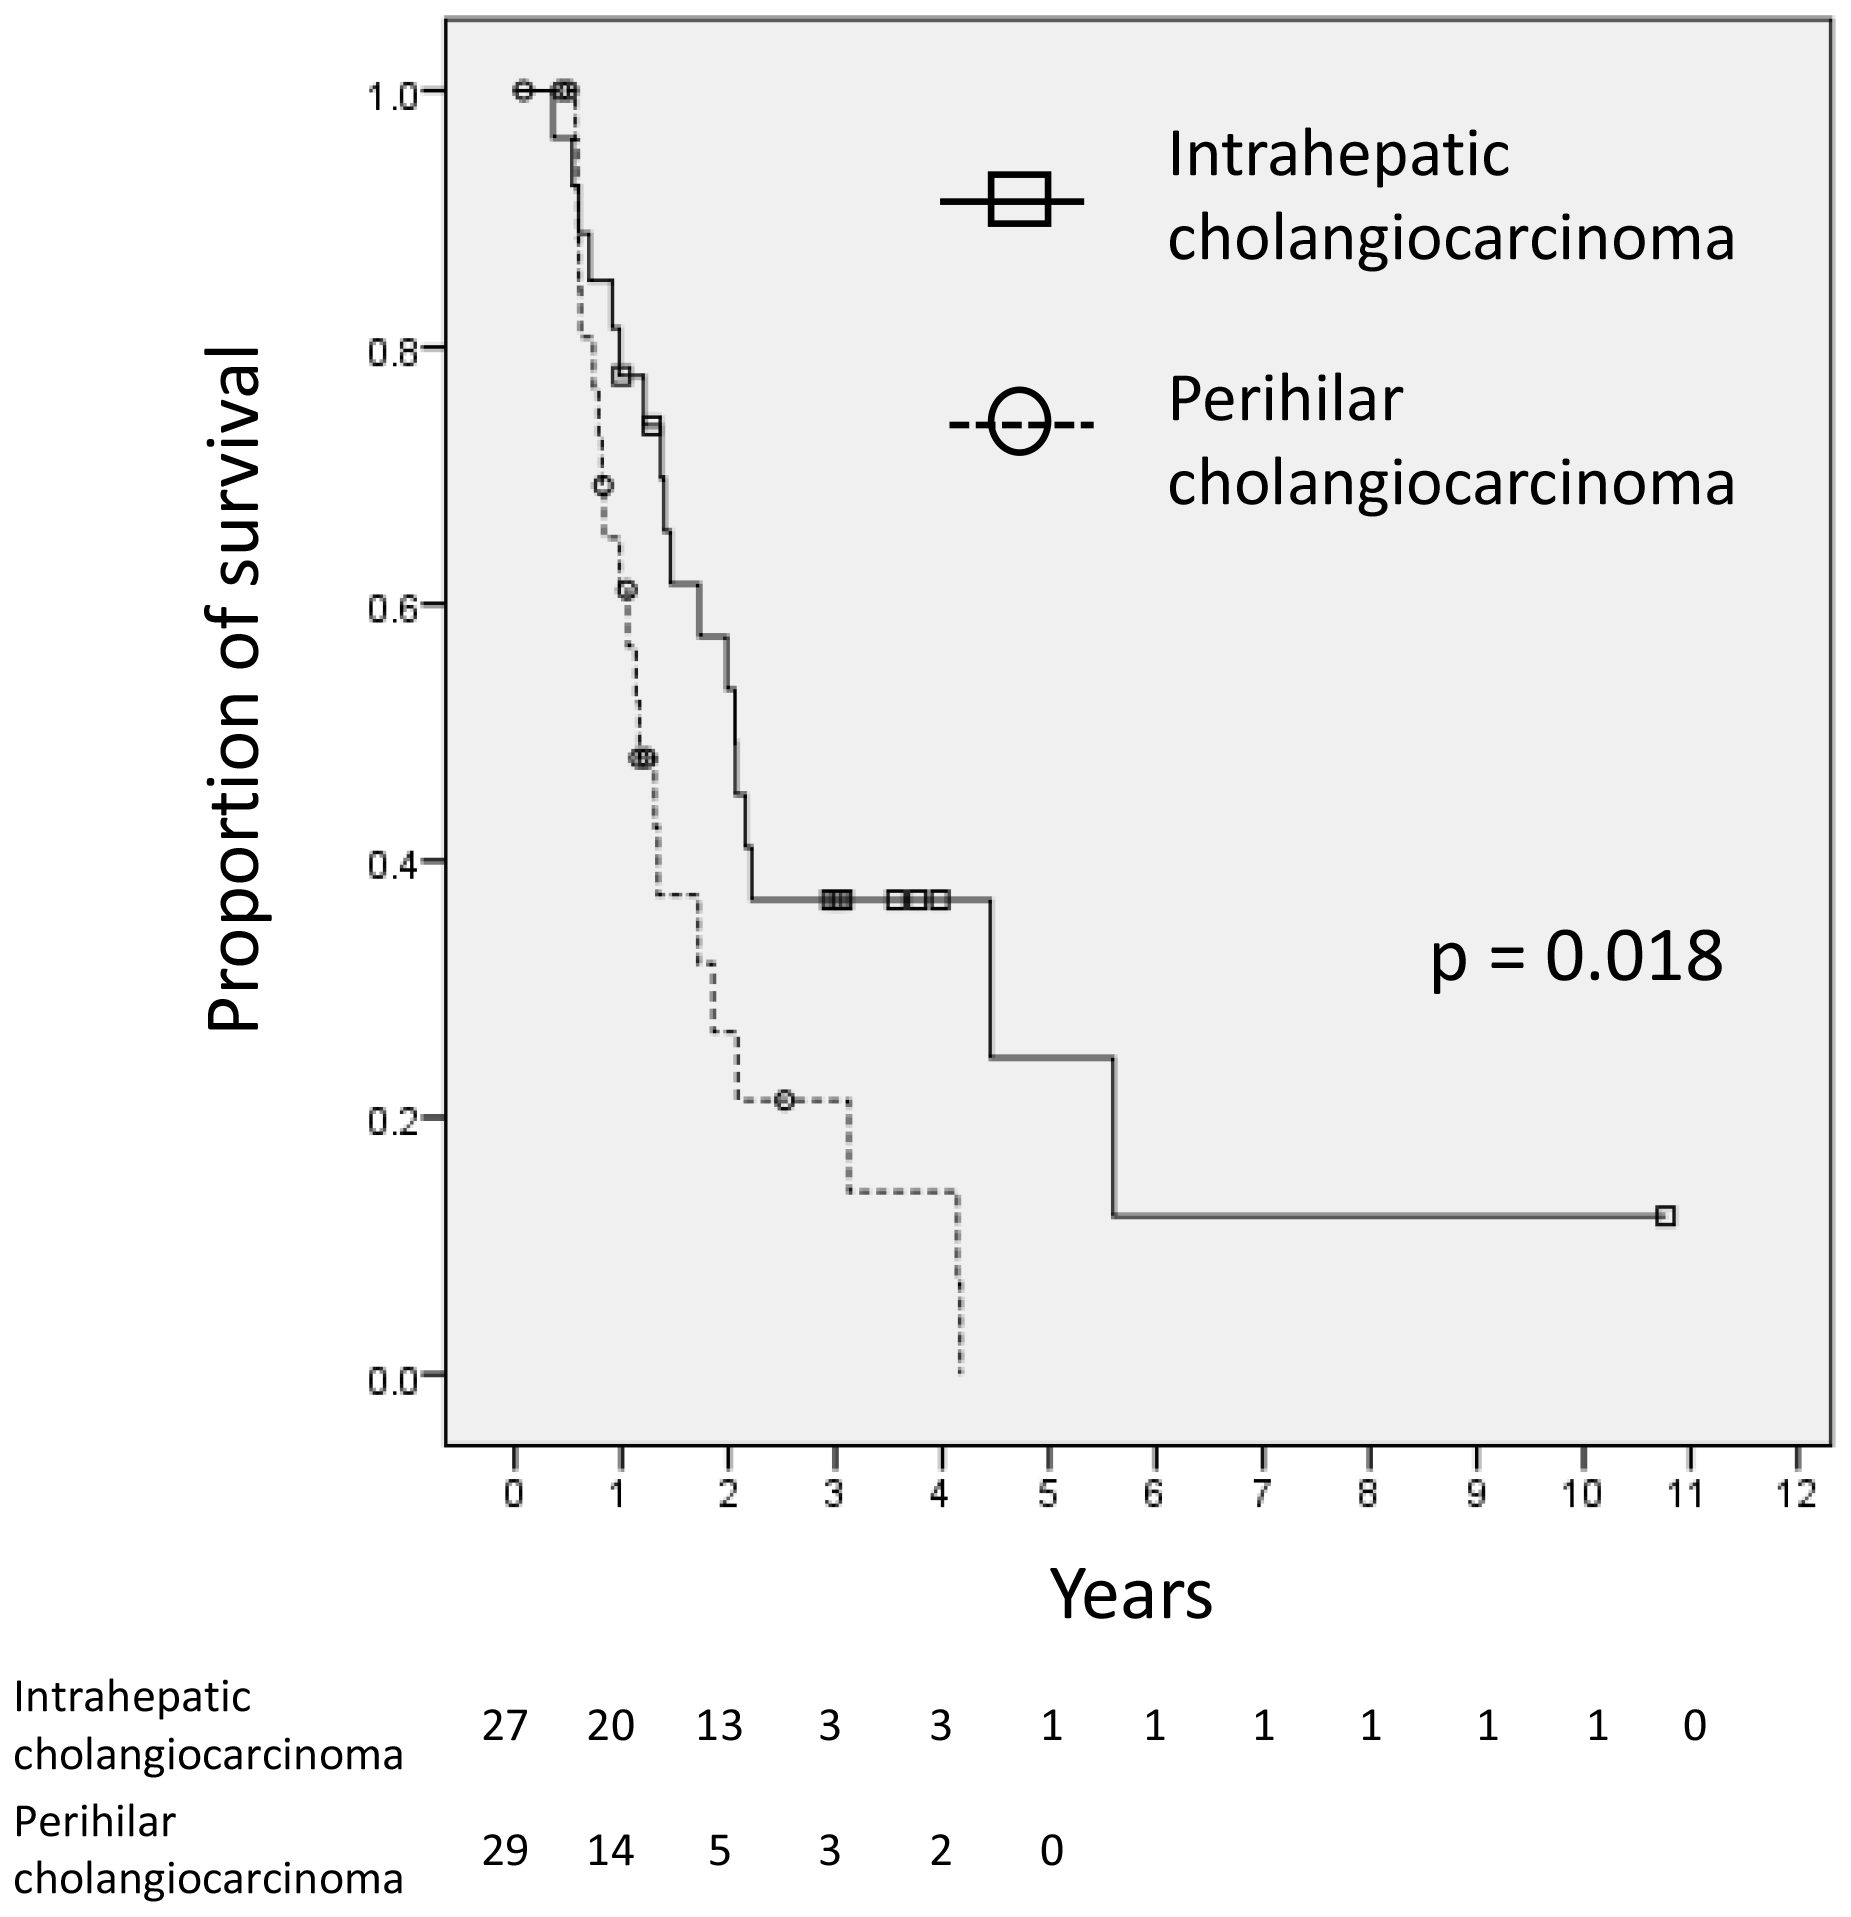 Kaplan‒Meier curves of the OS rates of patients with intrahepatic cholangiocarcinoma (n = 27) and perihilar cholangiocarcinoma (n = 29).